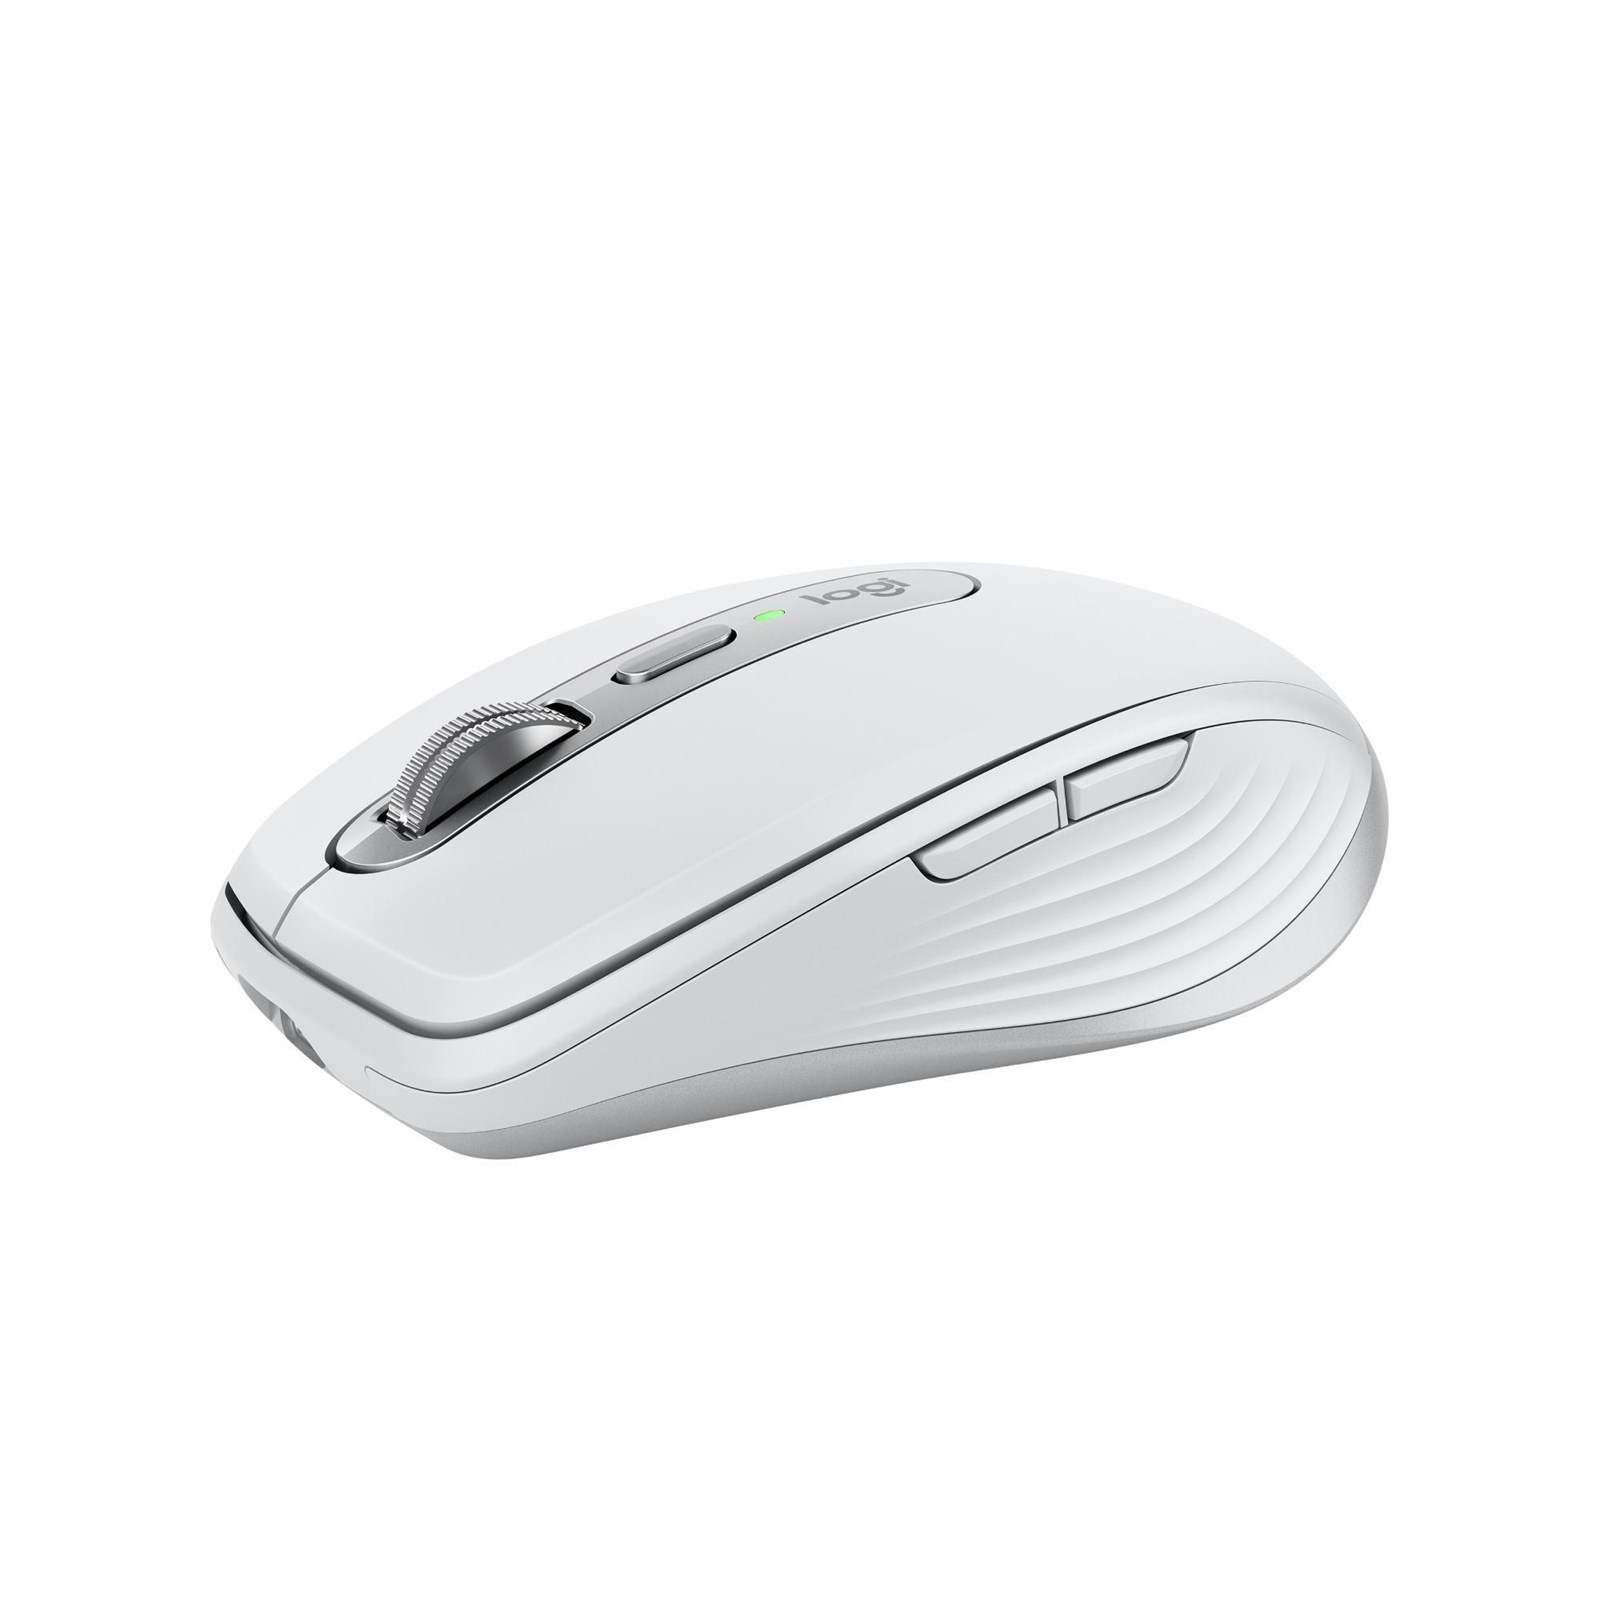 Logitech MX Anywhere 3S Compact Wireless Performance Mouse - Pale Grey